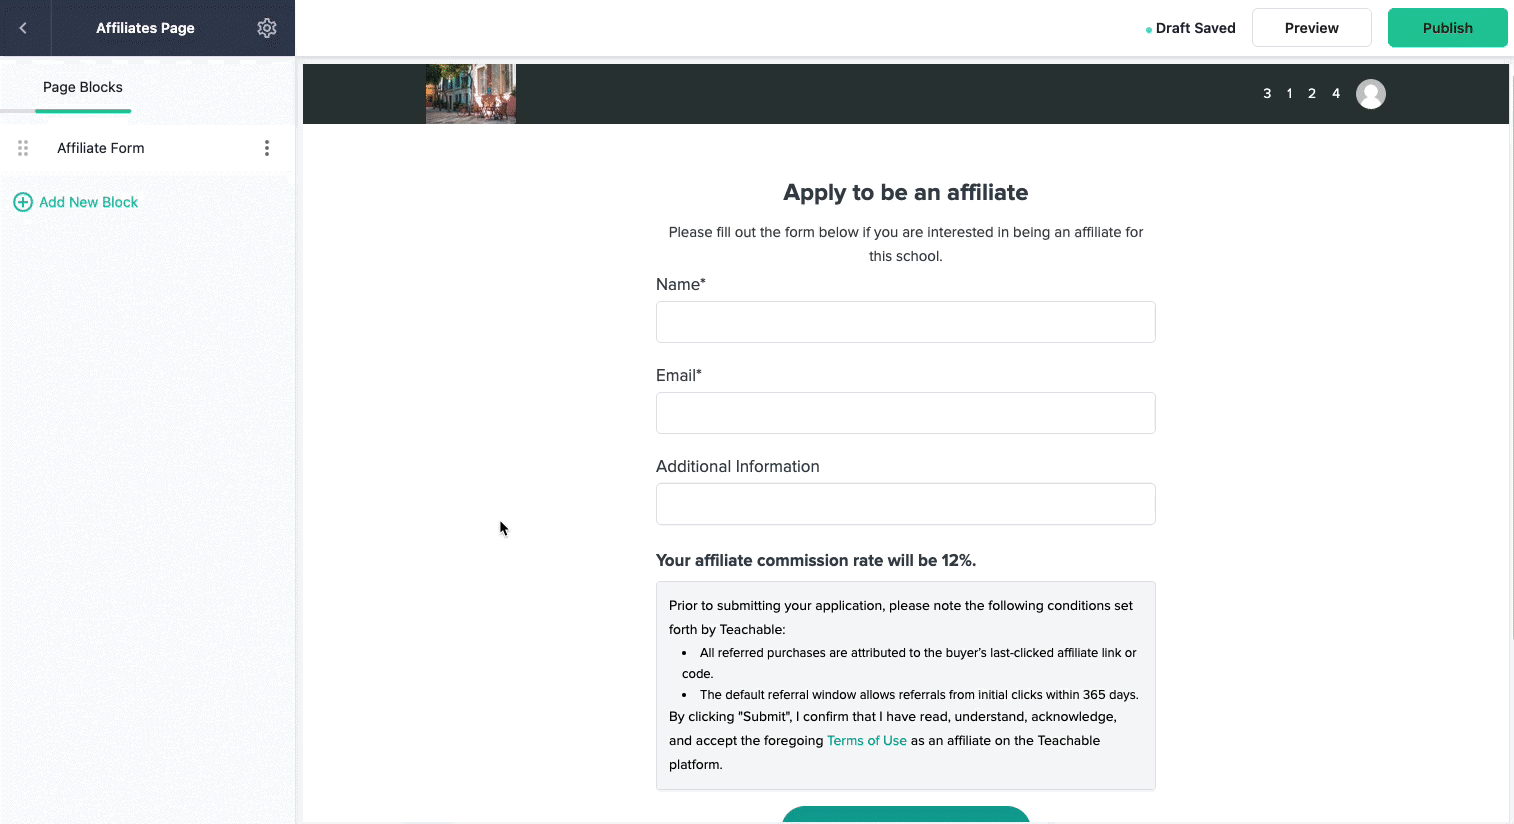 A view of the Teachable page editor. From the left side of the page, the Affiliate Form block is selected, which displays available fields to be filled out.